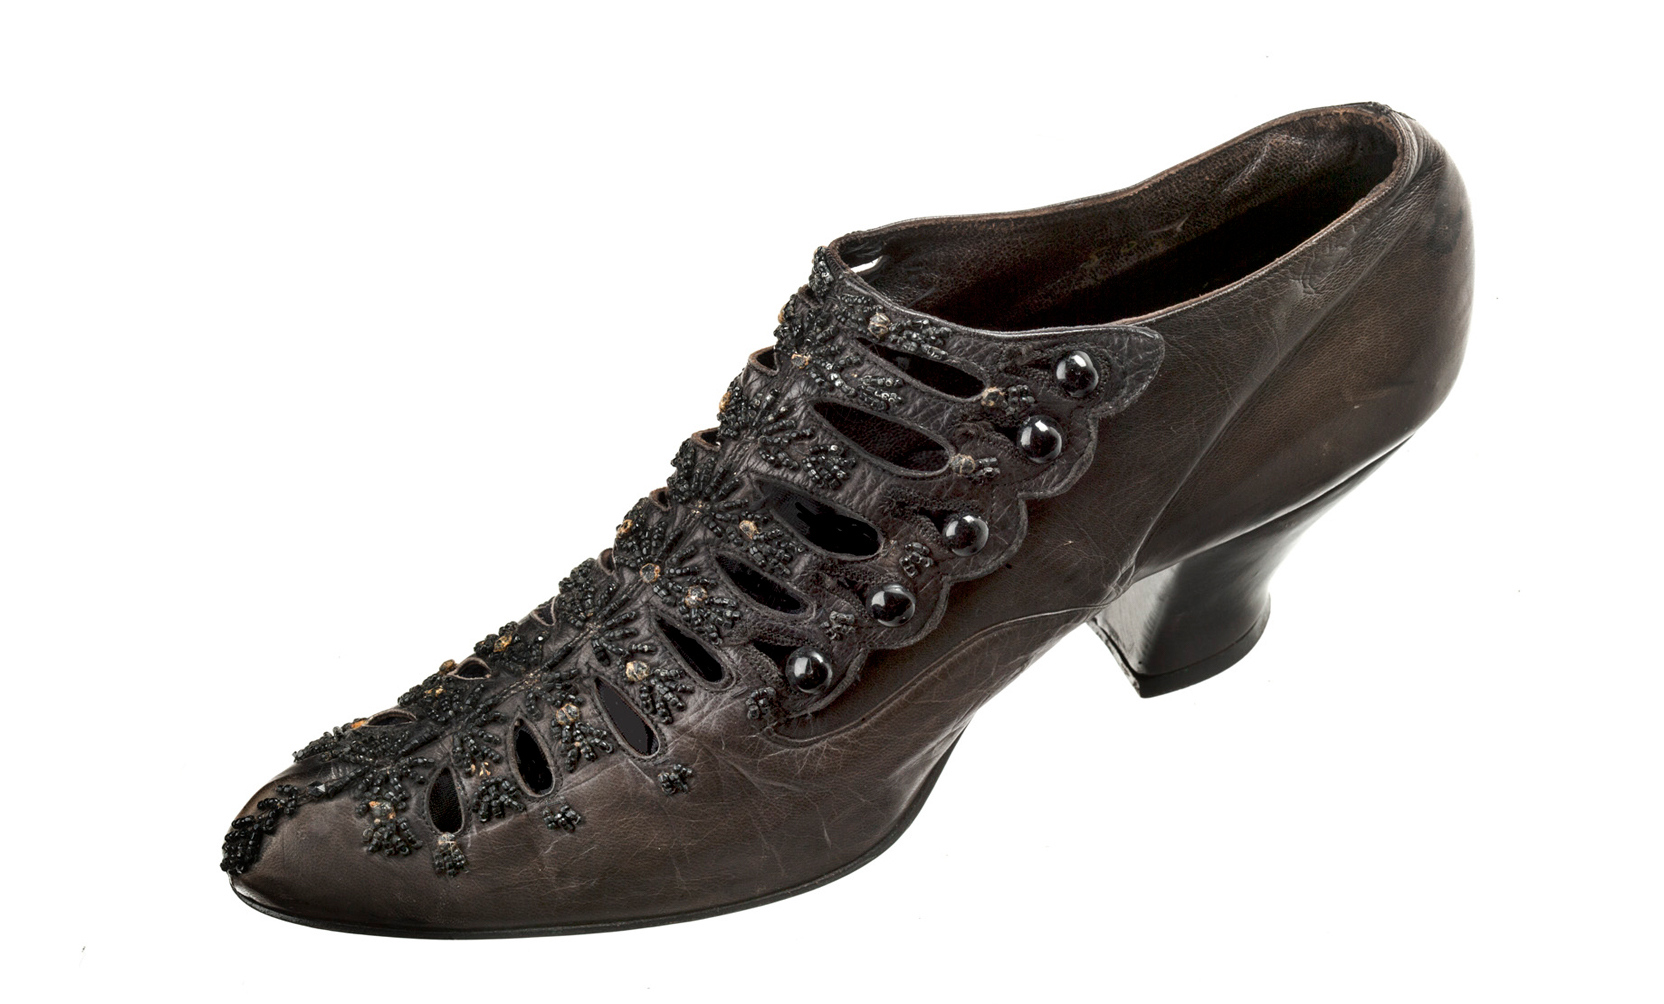 Buttoned Shoe, about 1915, leather, beads, and buttons, Stuart Weitzman Collection, no. 25. Photo credit: Glenn Castellano, New-York Historical Society